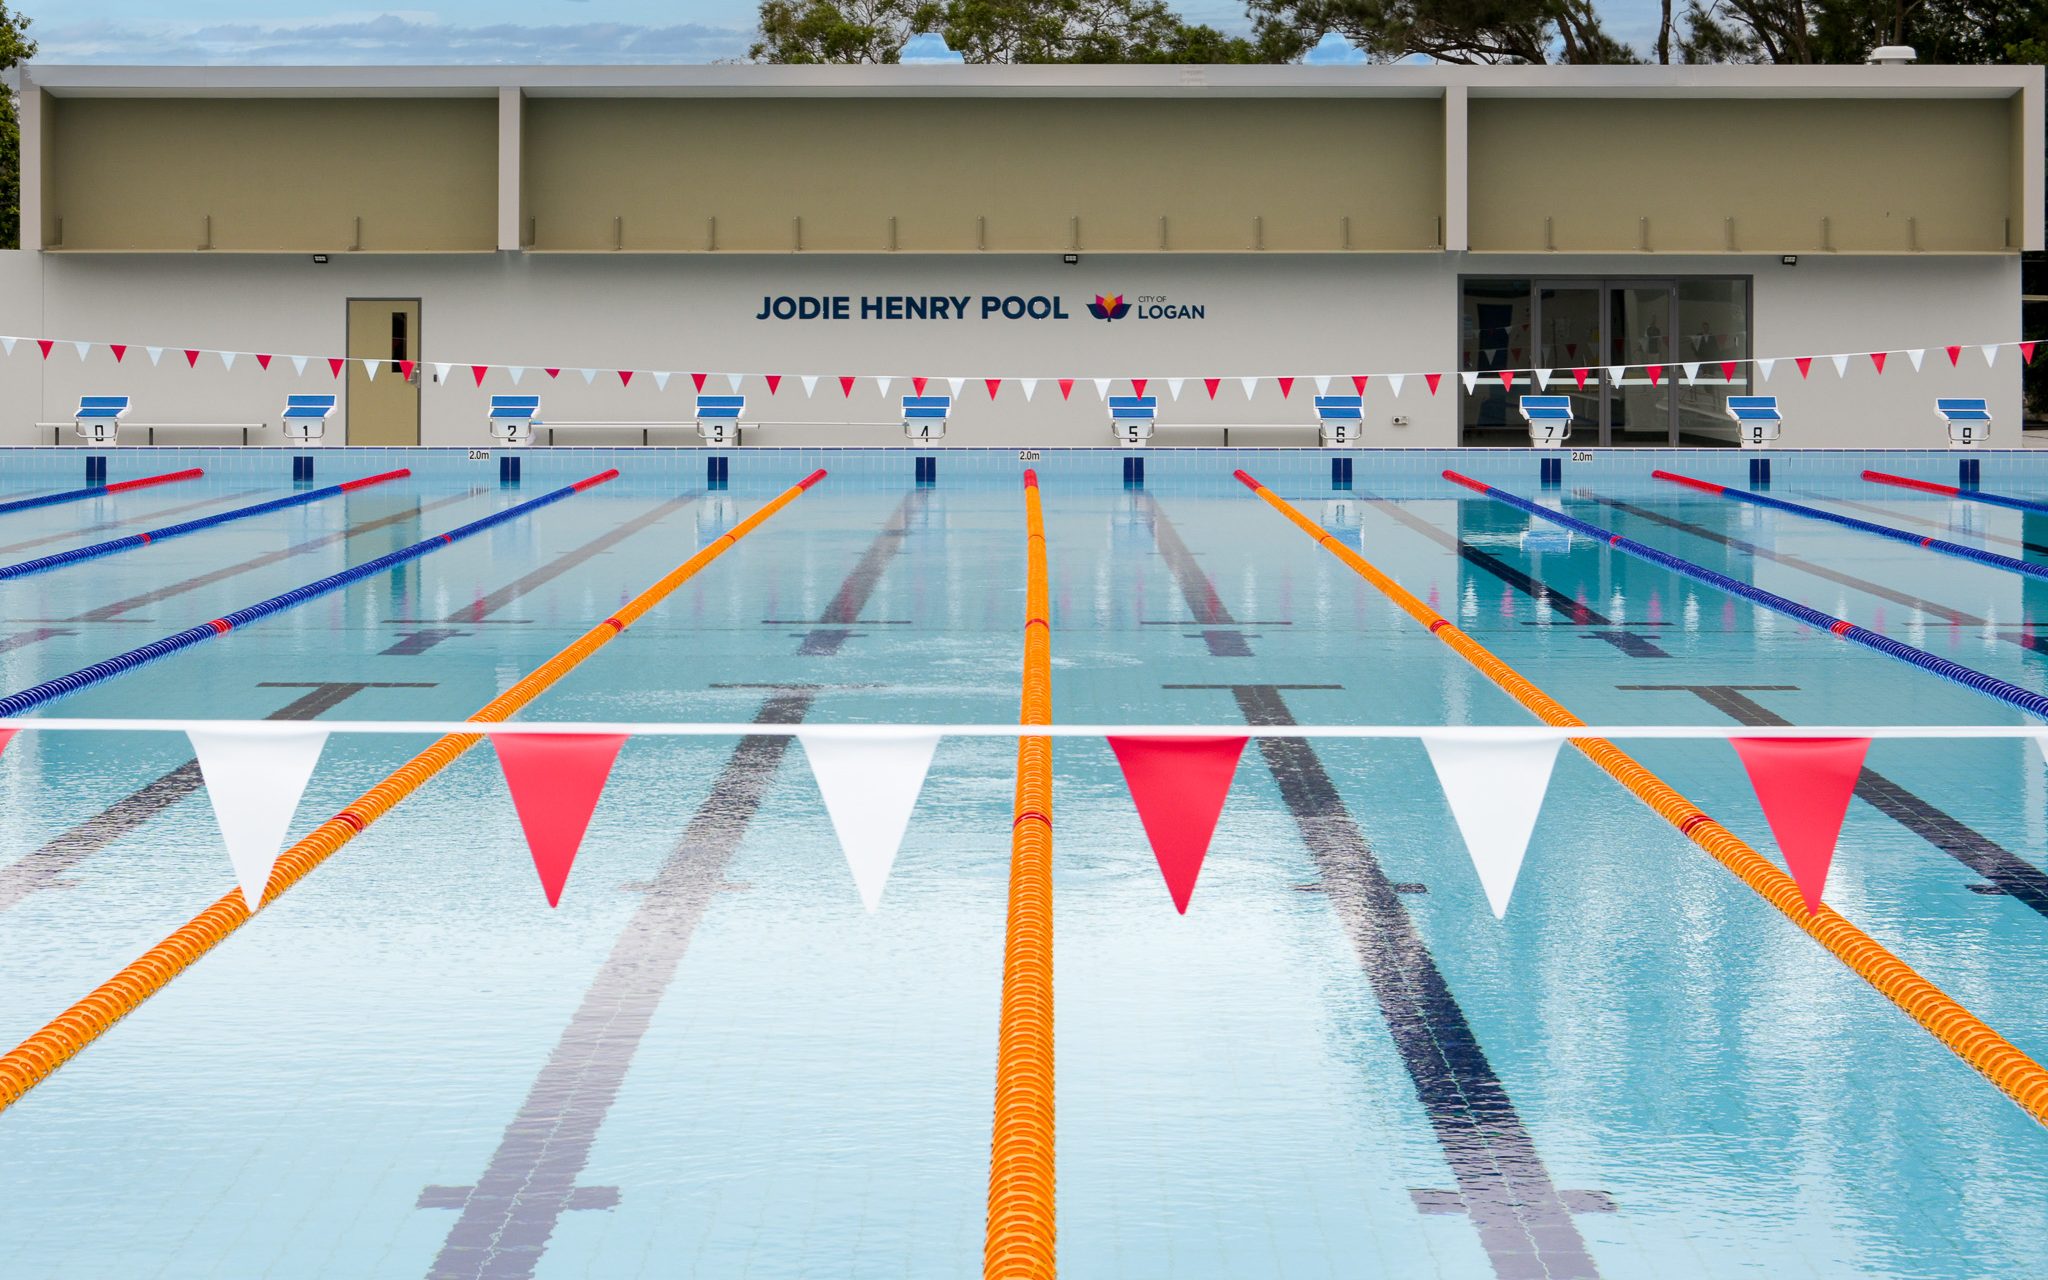 Jodie Henry pool sign centred behind outdoor pool